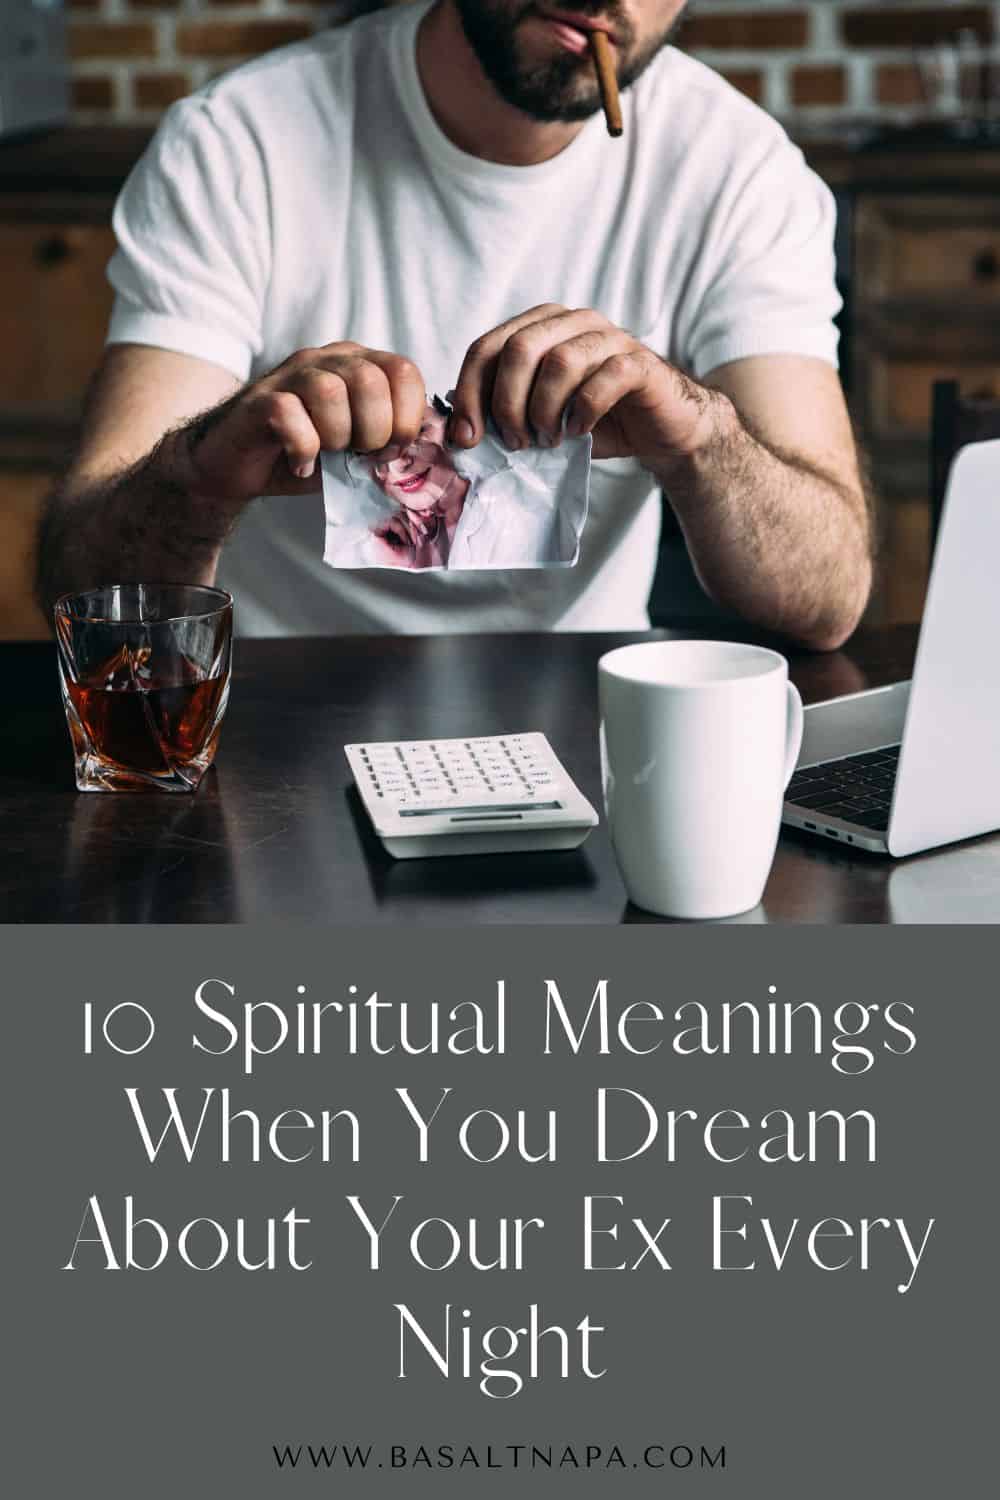 10 Spiritual Meanings When You Dream About Your Ex Every Night